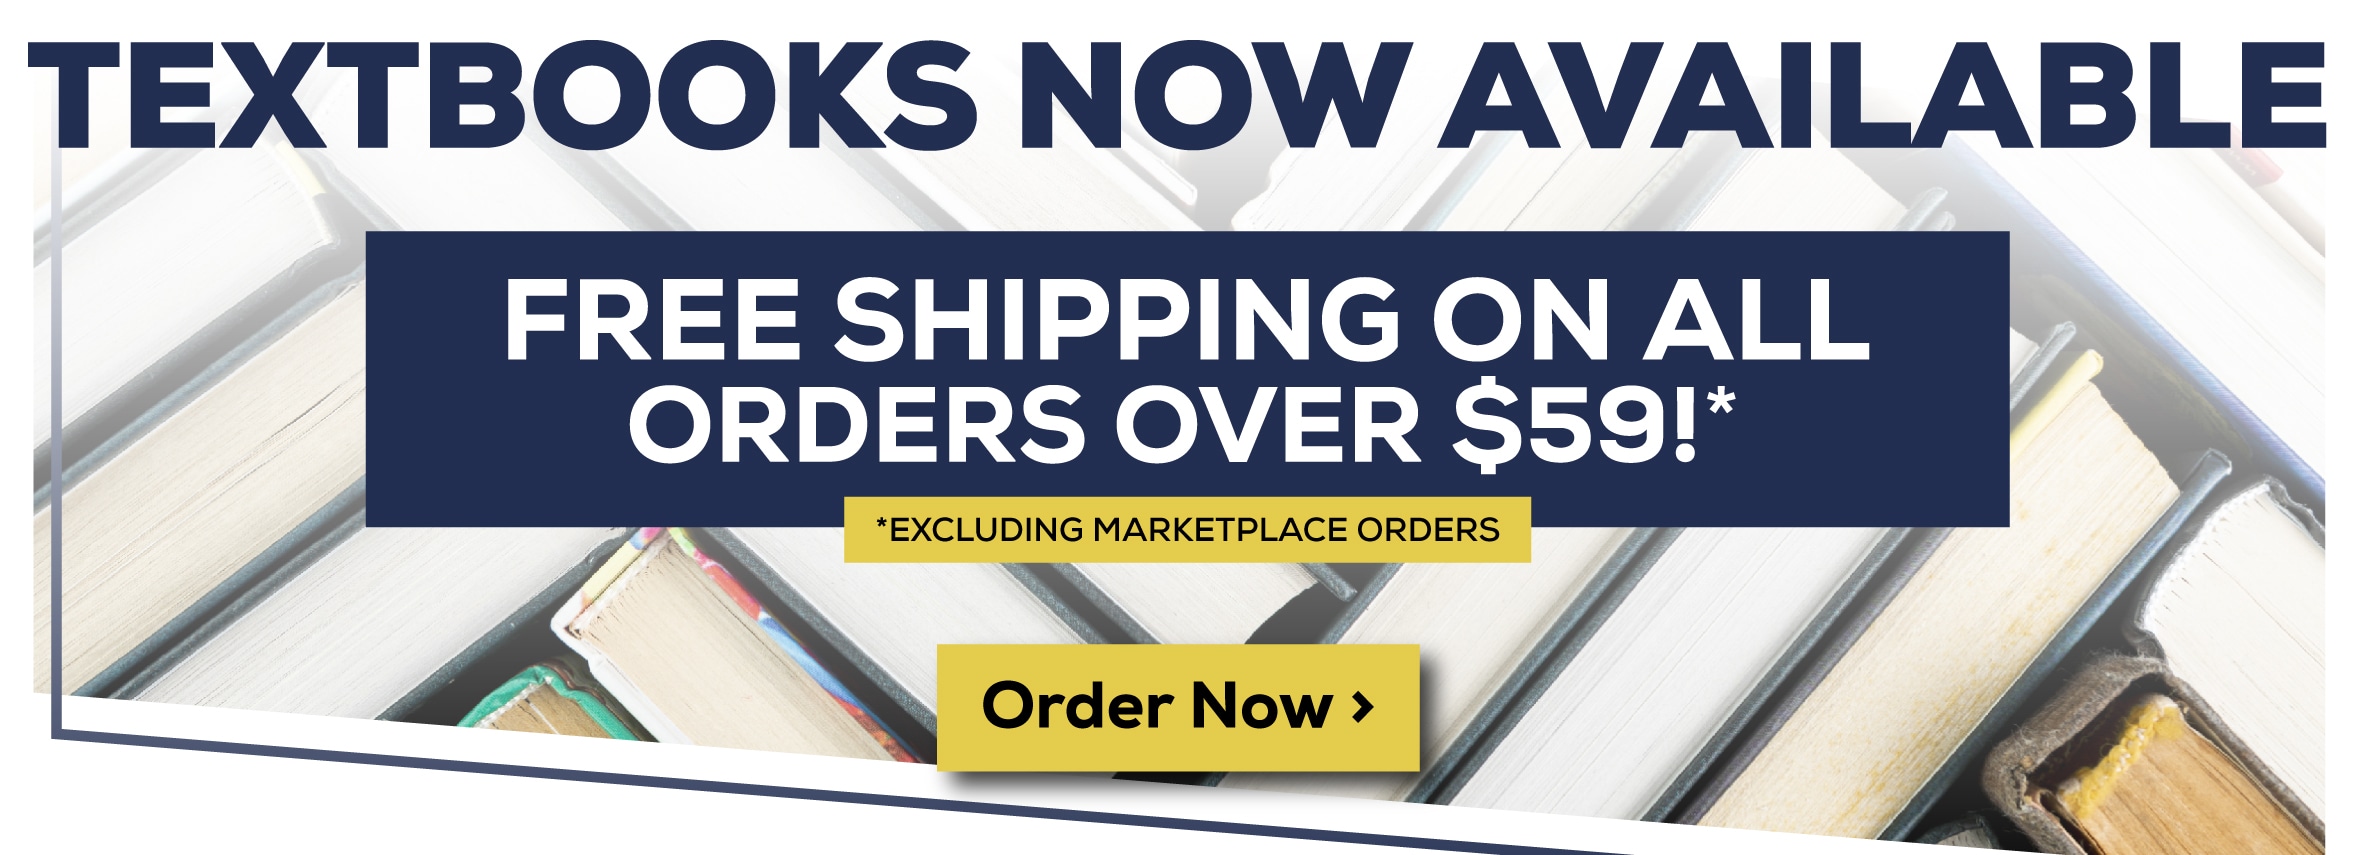 Textbooks Now Available. Free shipping on all orders over $59. Excluding marketplace orders. Order now!